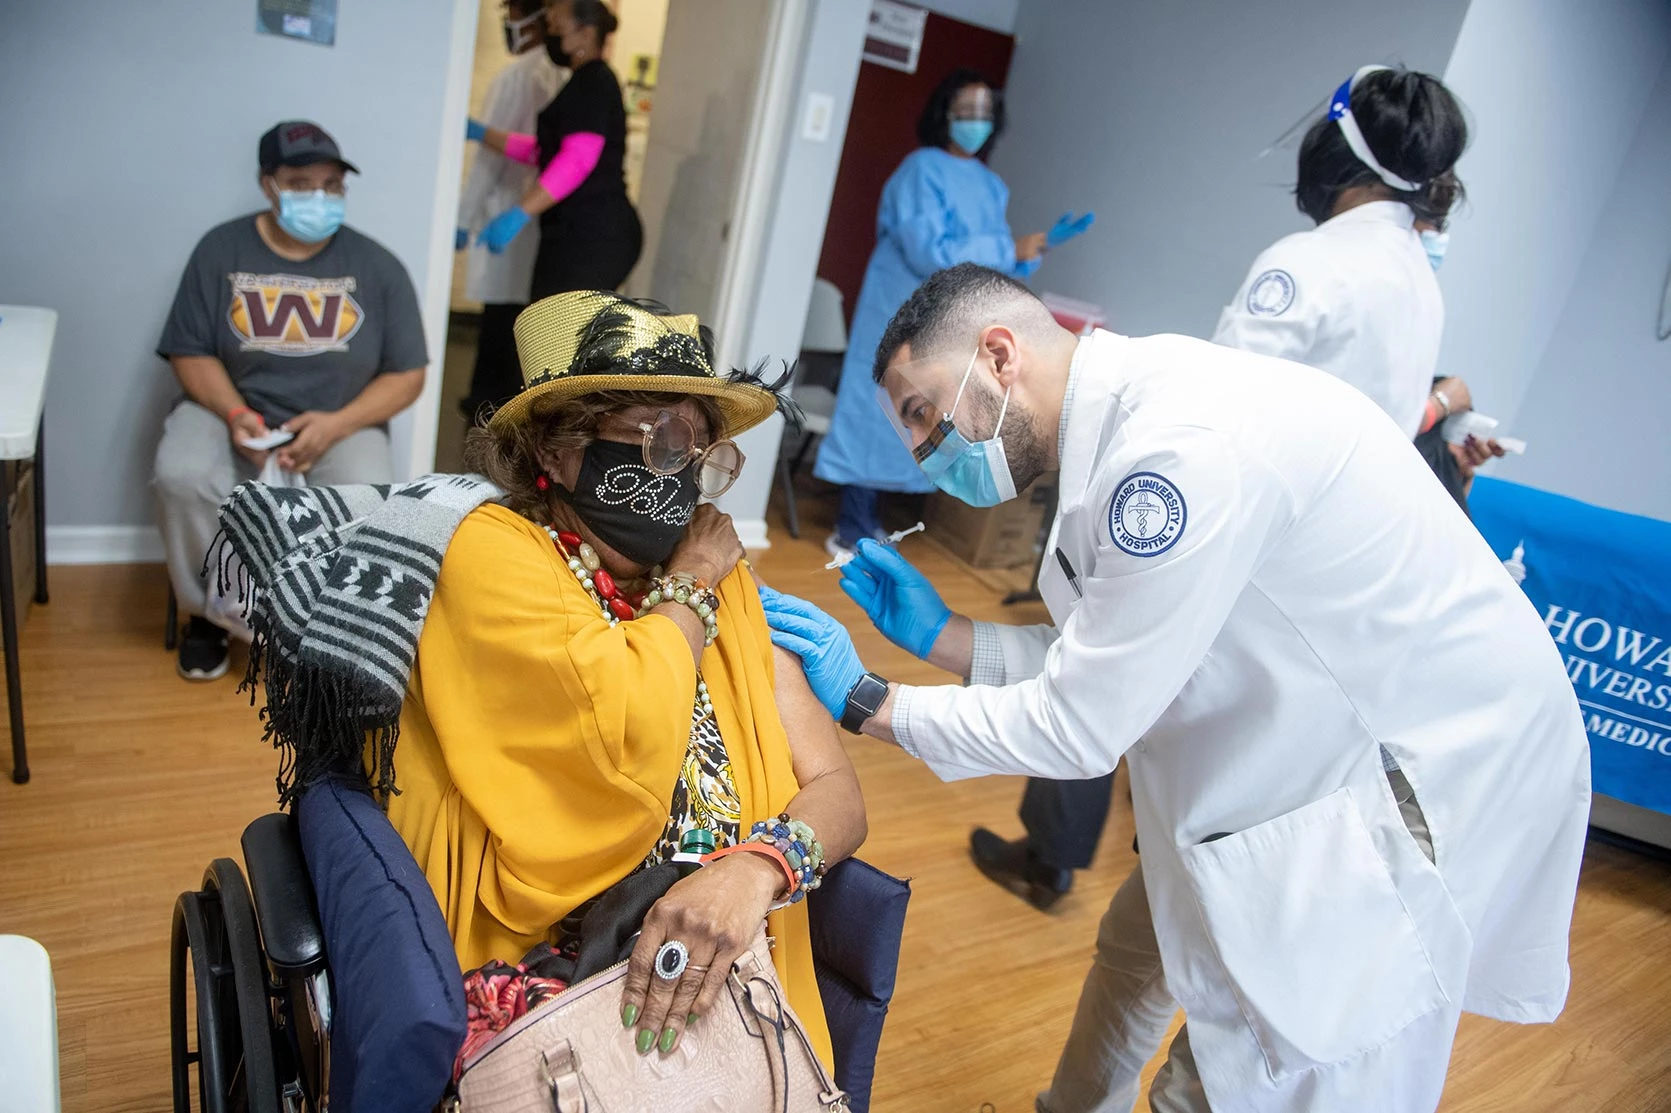 A doctor working at the Howard University vaccination center provides a vaccination to an elderly woman in a wheelchair.